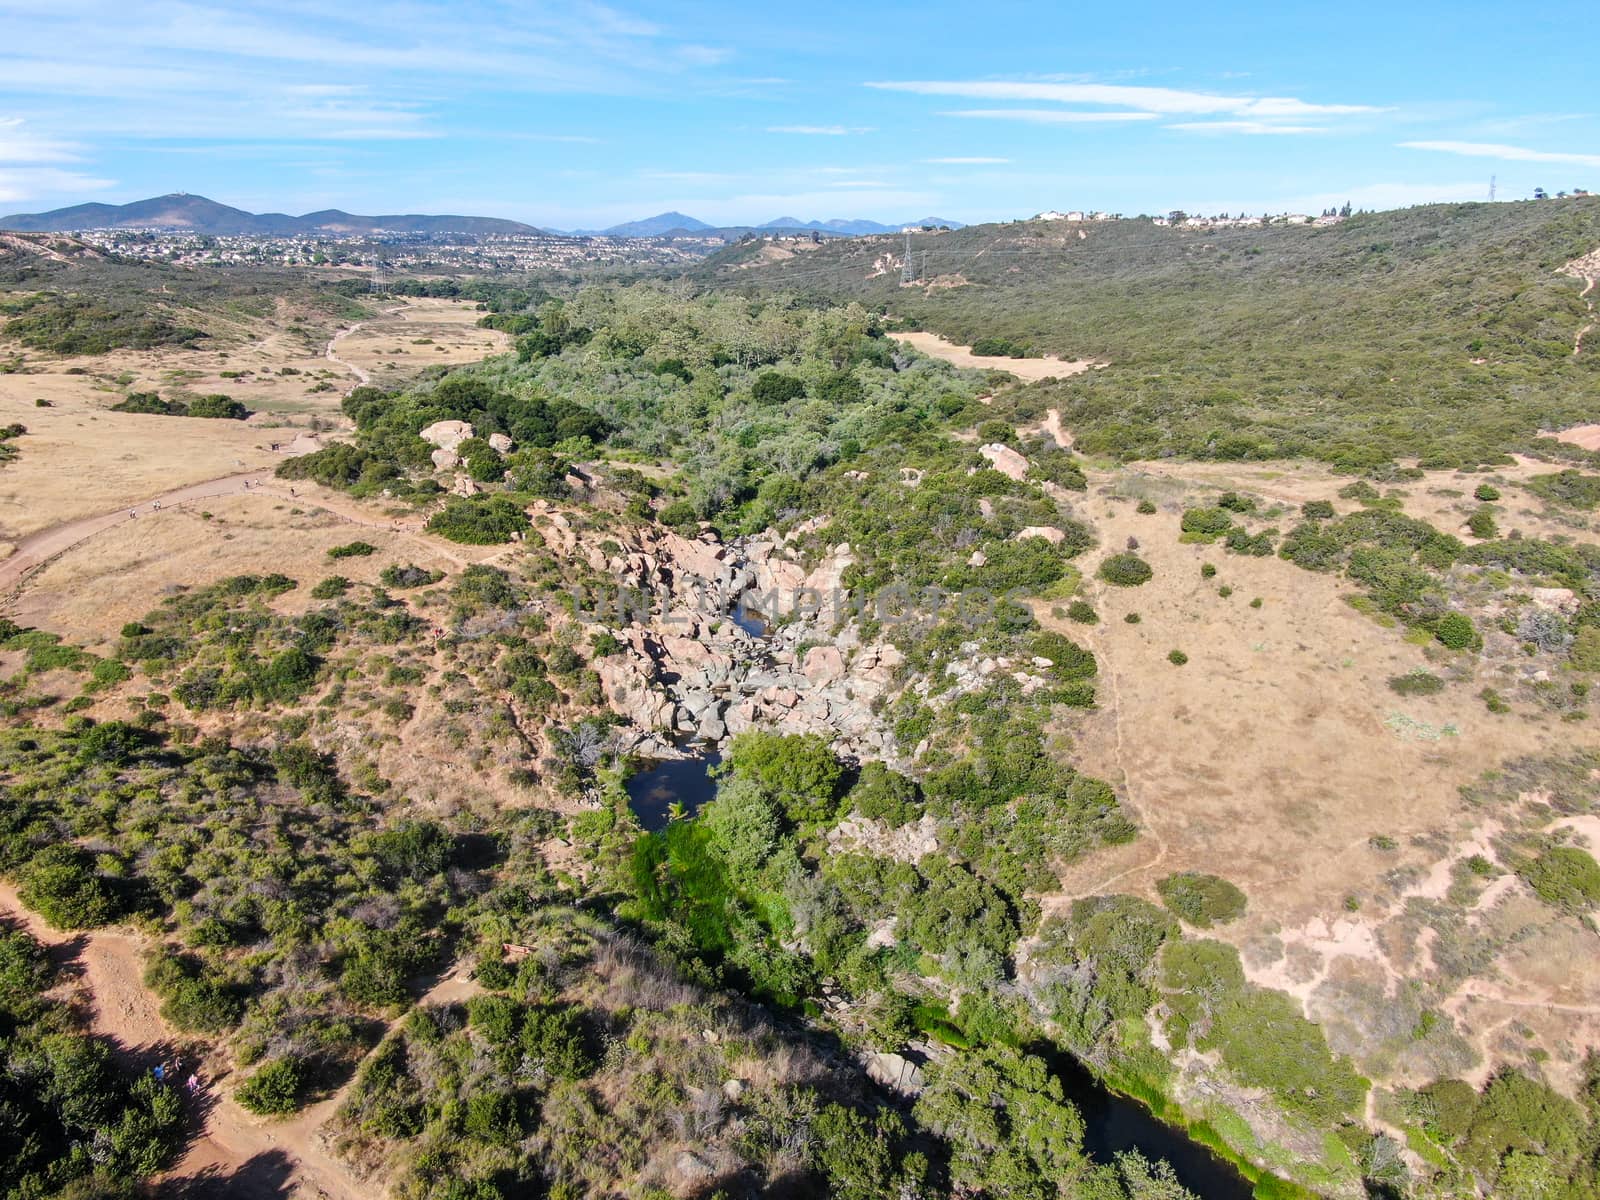 Aerial view of Los Penasquitos Canyon Preserve with the creek waterfall and people enjoying the water. Urban park with trails and river in San Diego, California. USA